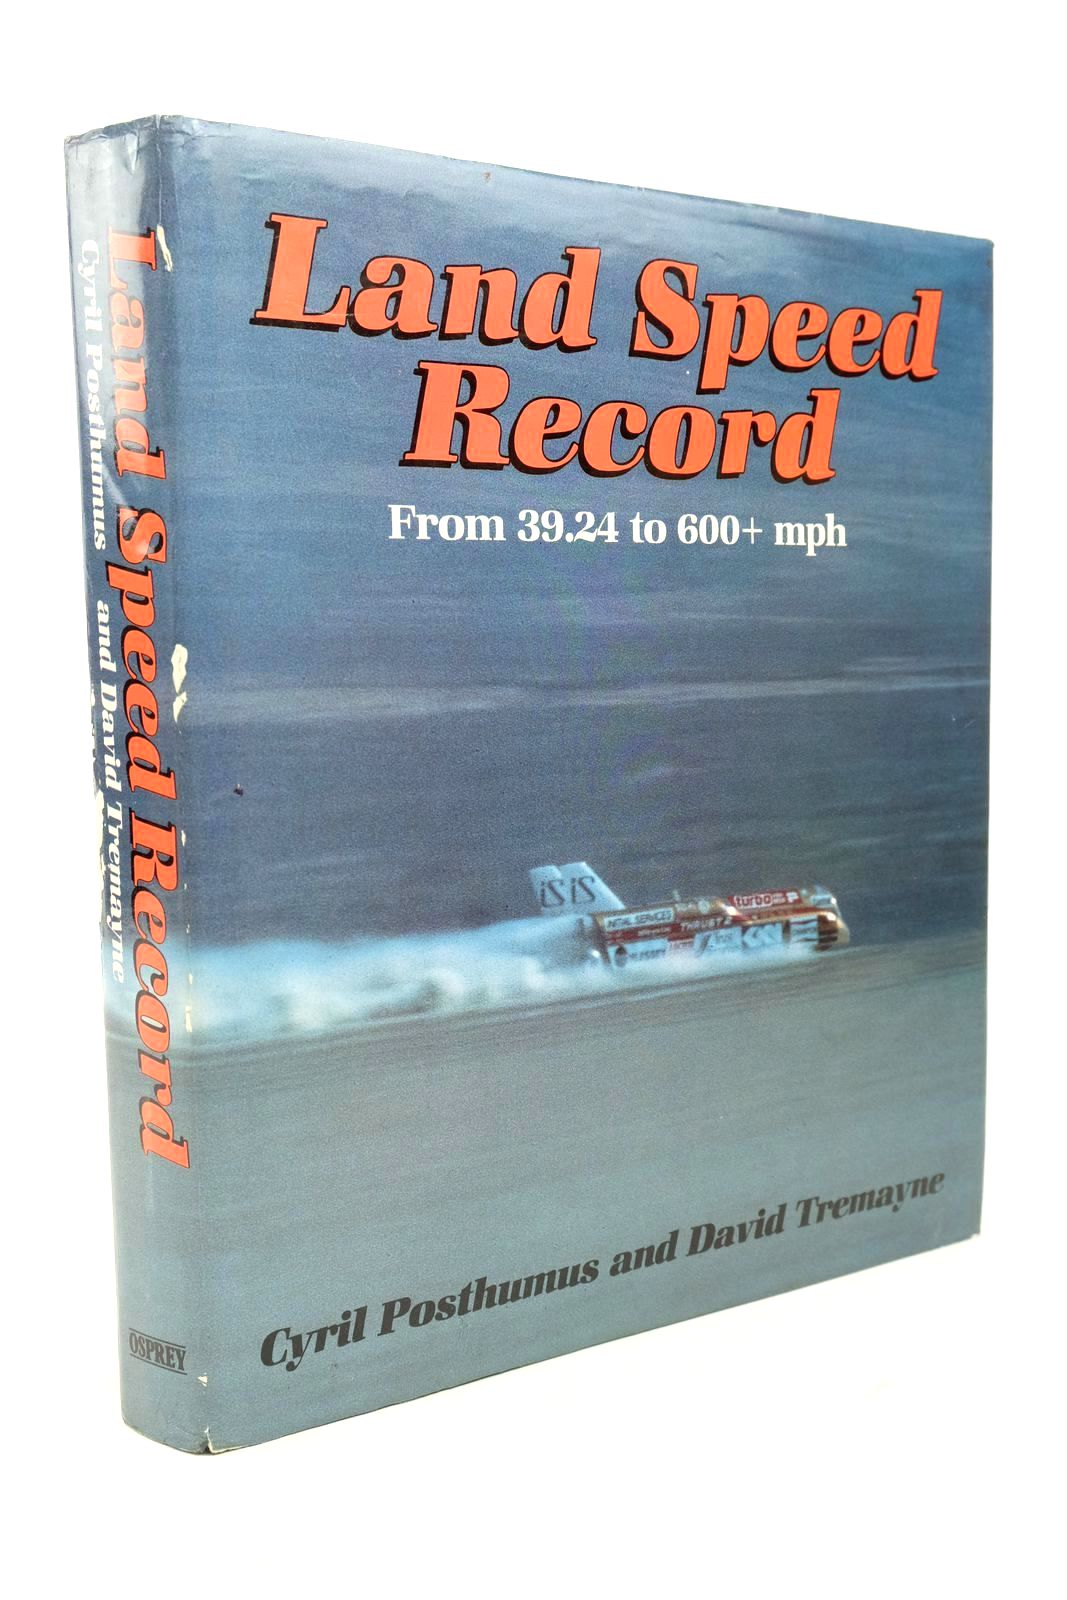 Photo of LAND SPEED RECORD written by Posthumus, Cyril
Tremayne, David published by Osprey Publishing (STOCK CODE: 1323164)  for sale by Stella & Rose's Books